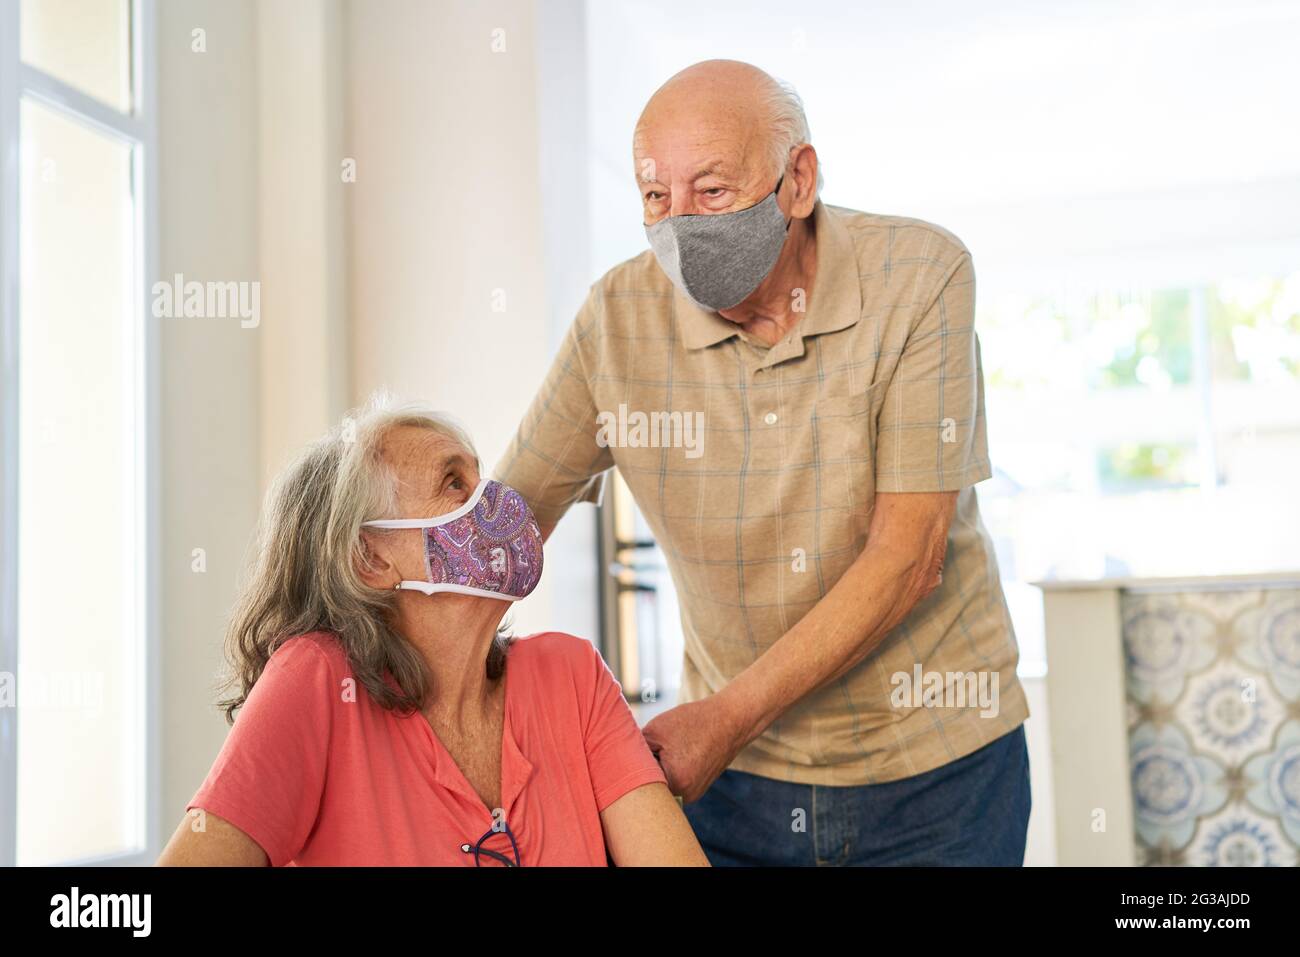 Senior couple with face mask because of Covid-19 and coronavirus as a symbol for vulnerable group Stock Photo